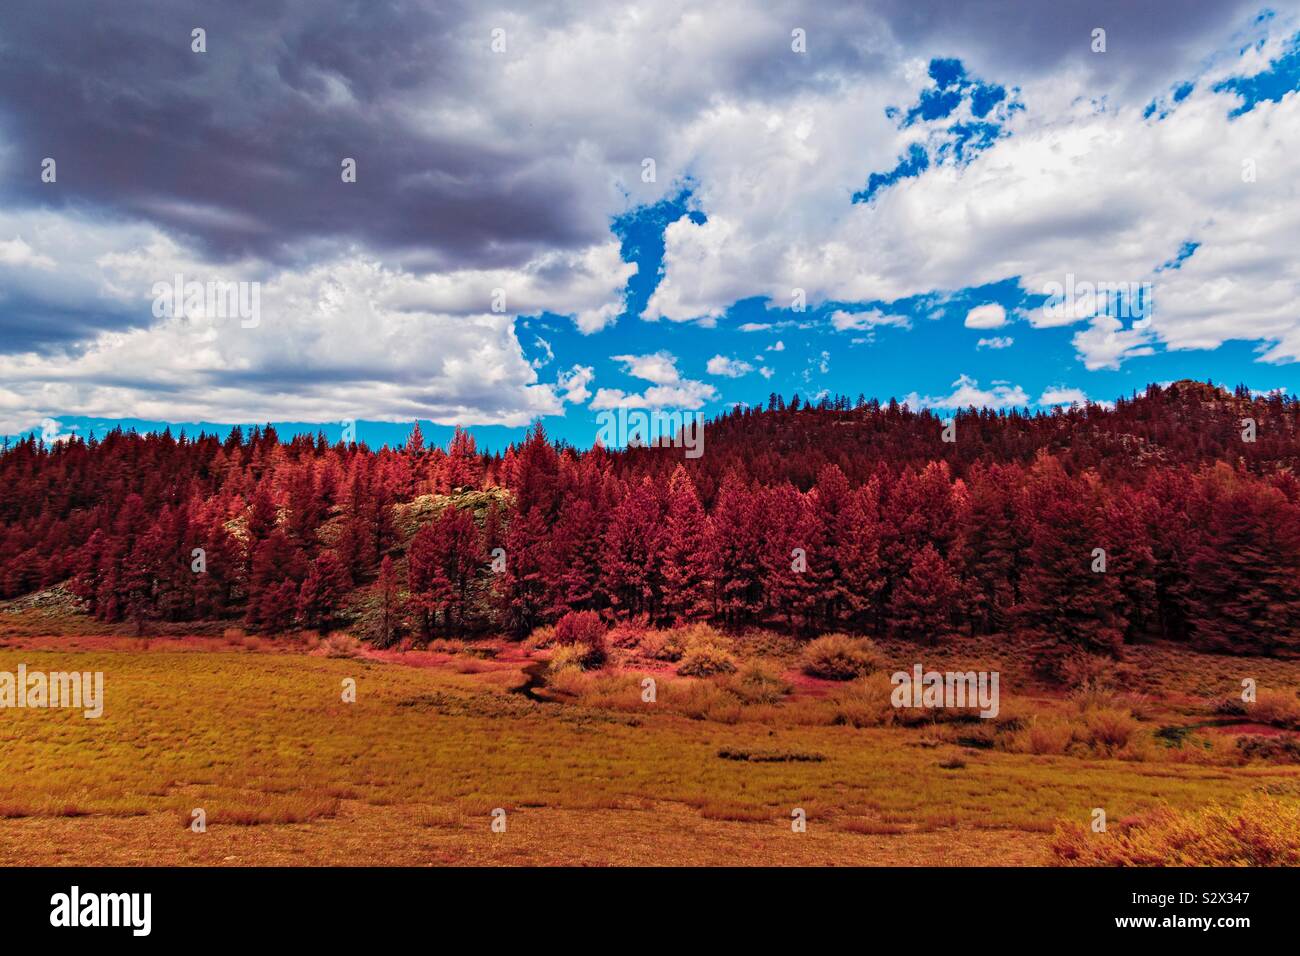 October countryside with red and orange trees and foliage under bright blue sky with white fluffy clouds. Stock Photo